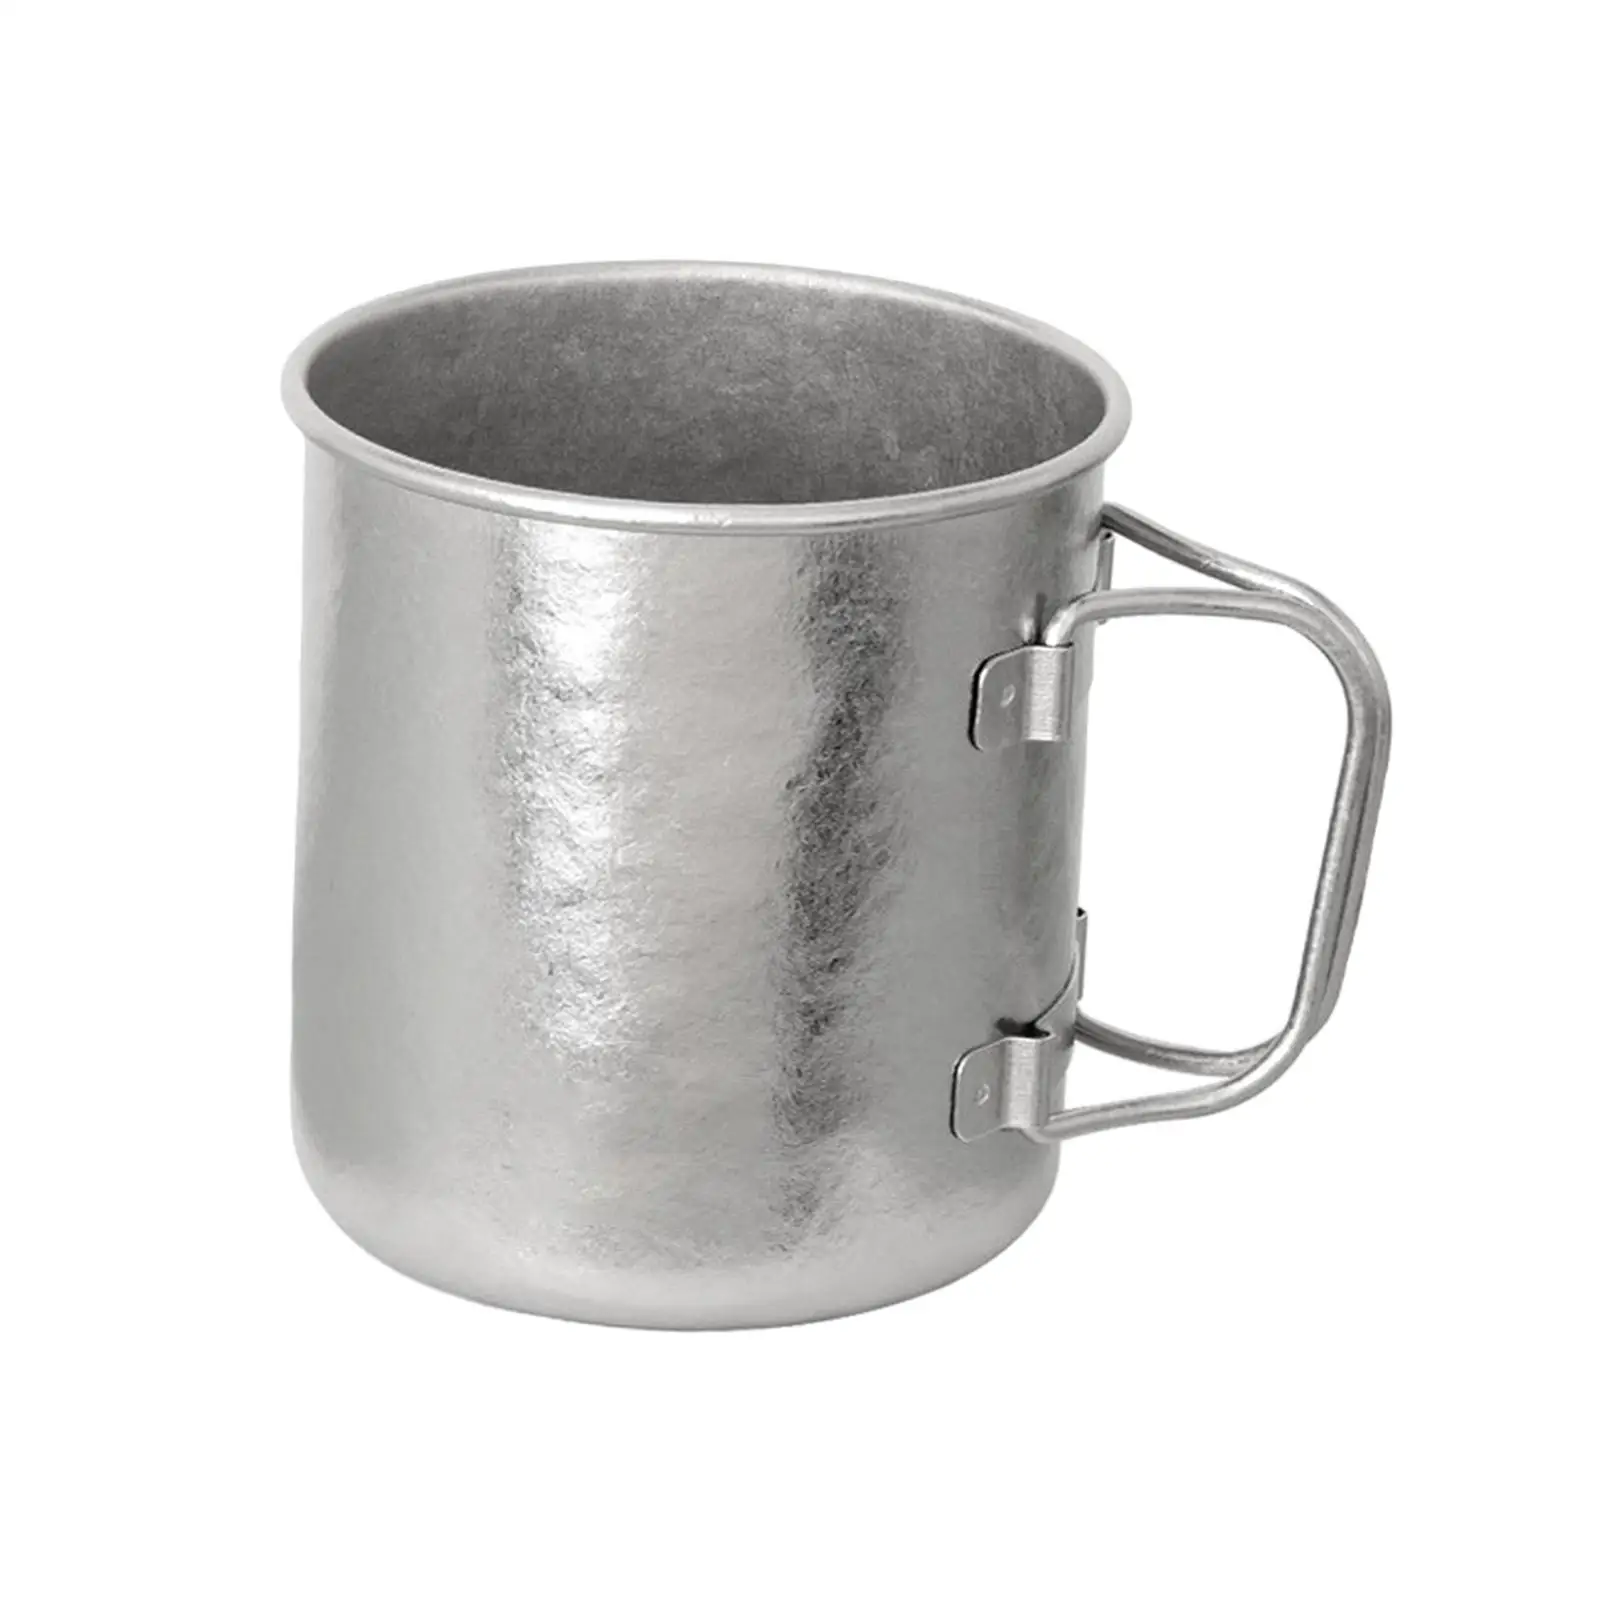 Lightweight Titanium 450ml Cup Camping Mug Foldable Handle Tea Water Cup Tableware for Campfire Outdoor Hiking Drinking